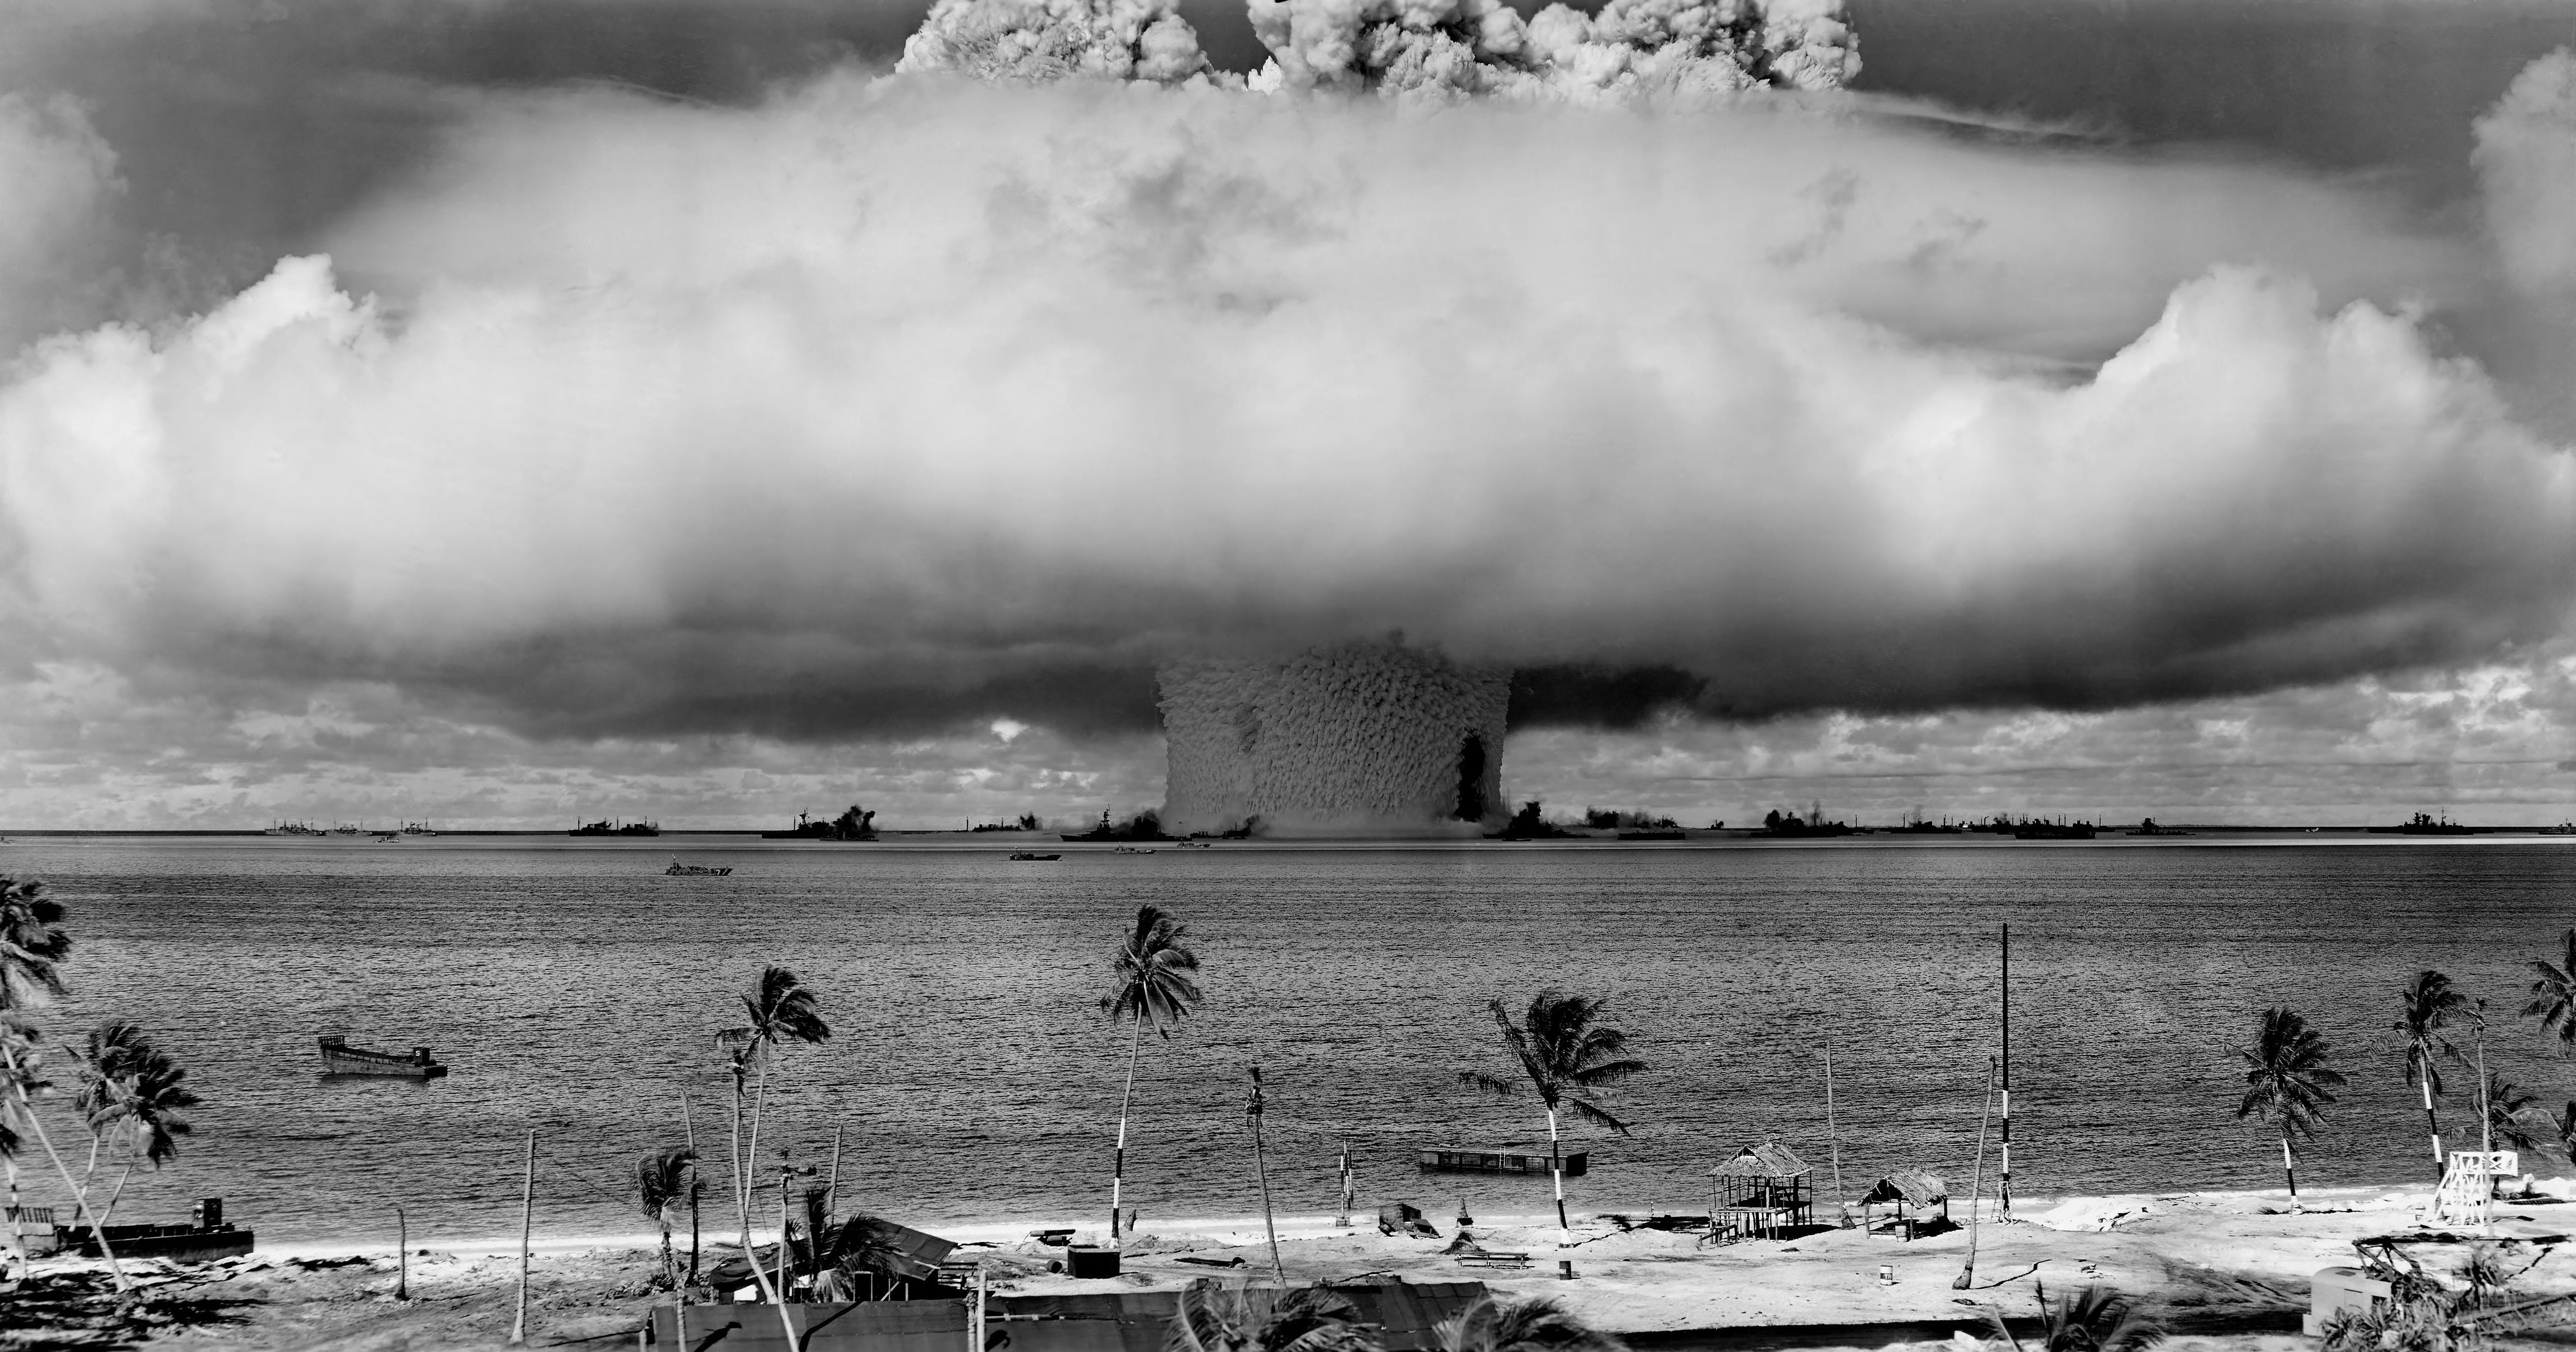 Testing the Hydrogen Bomb:The Marshall Islands Story